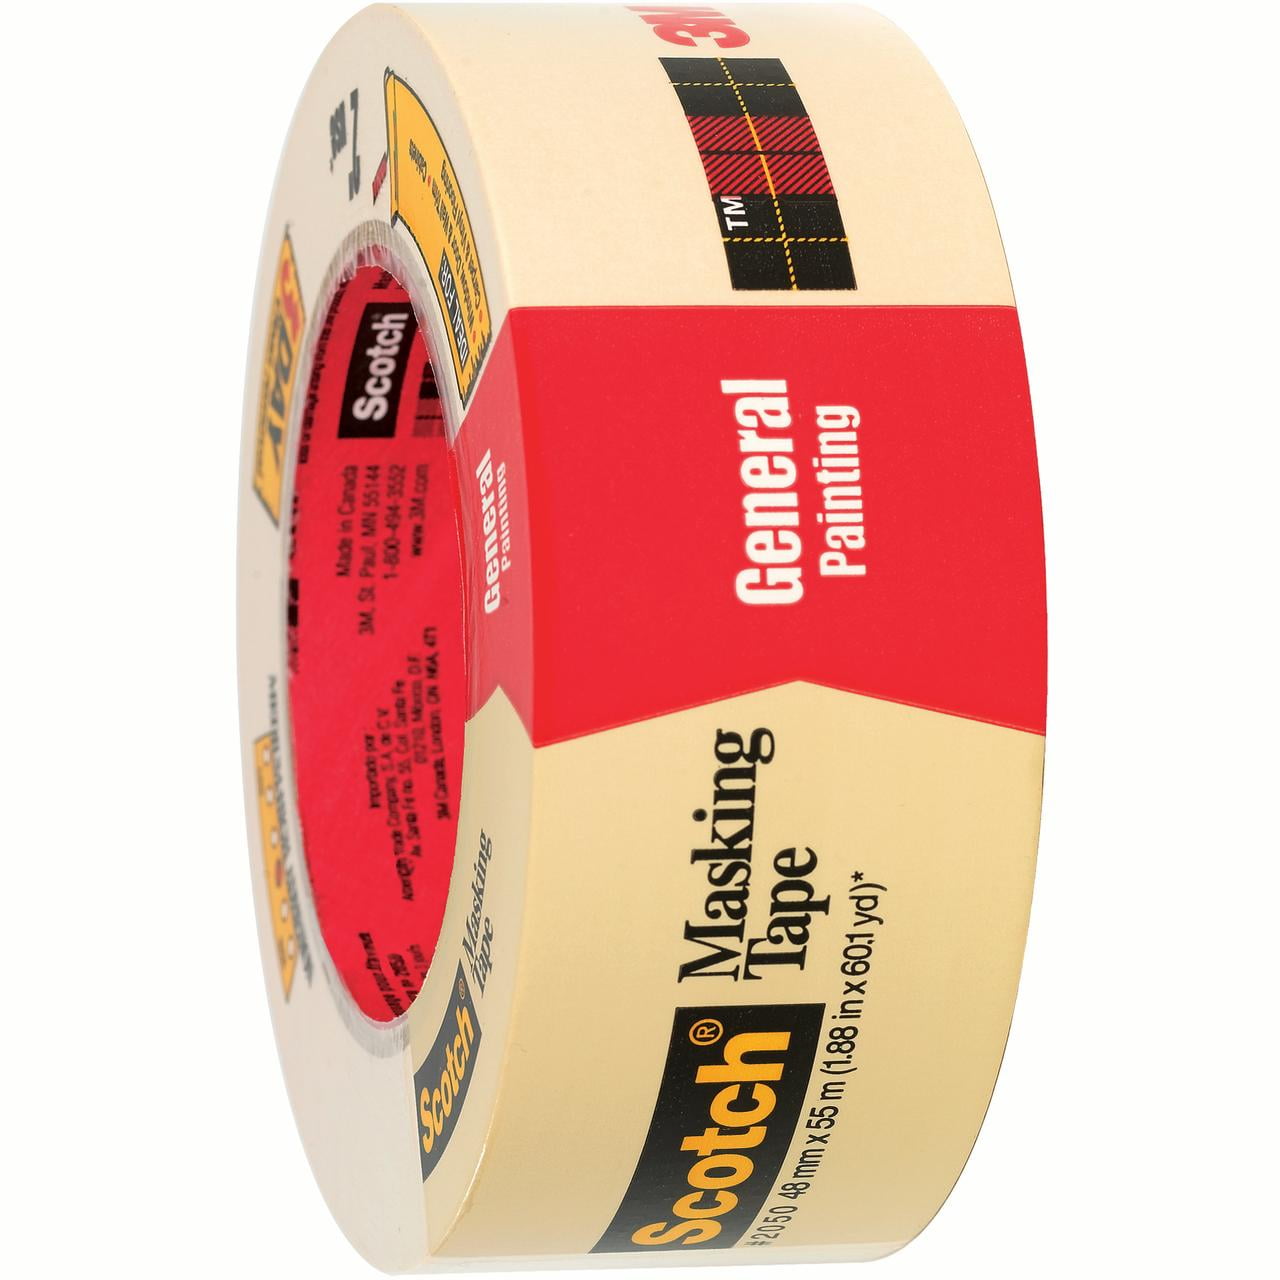 Scotch T9372050 2 In. X 60 Yards 2050 Masking Tape, Natural - Case Of 24